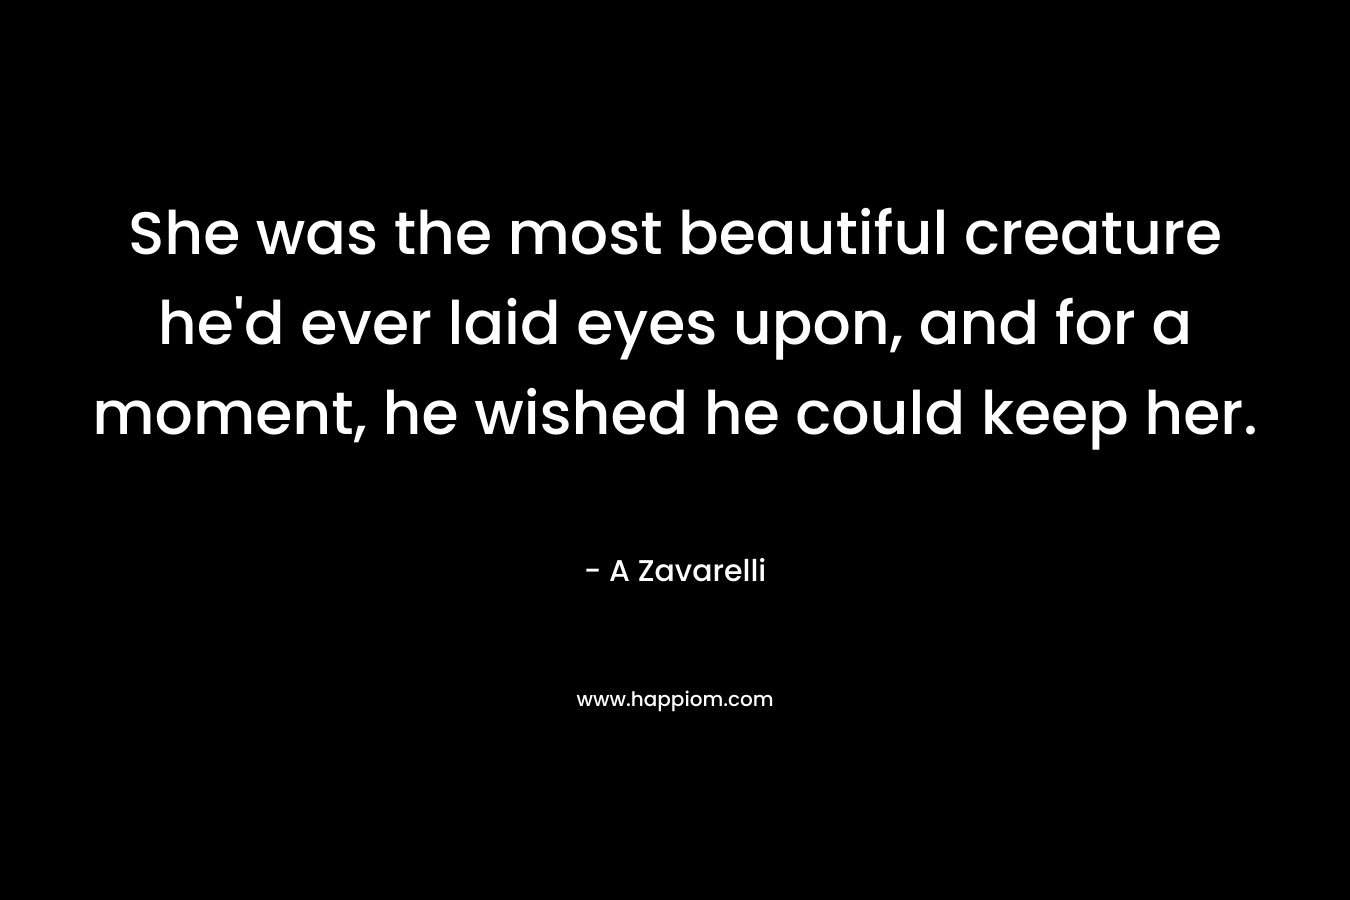 She was the most beautiful creature he’d ever laid eyes upon, and for a moment, he wished he could keep her. – A Zavarelli